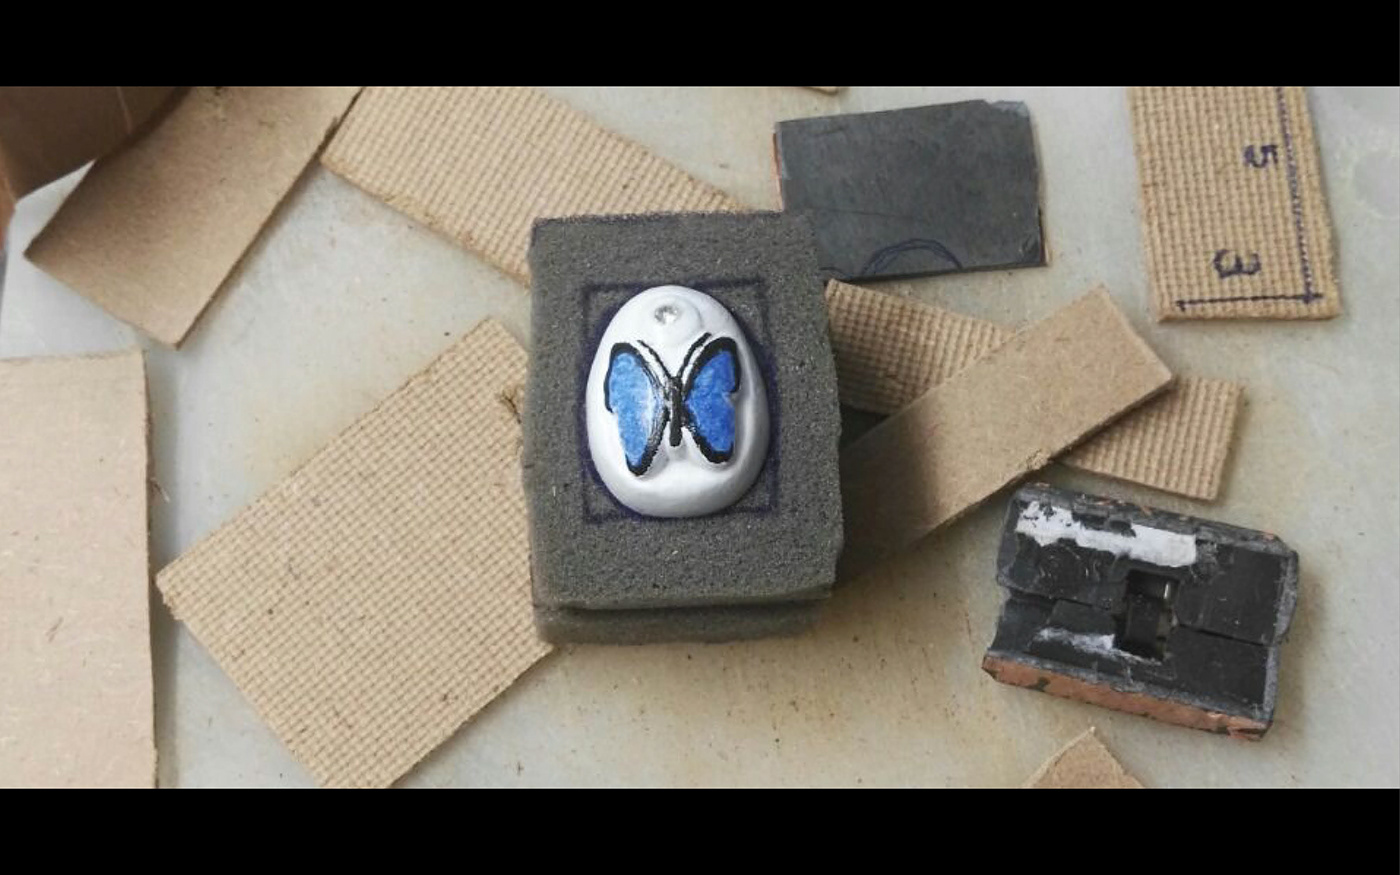 Friendship present gift Beawtiful present engagement gift blue butterfly original gift charming gift charming Beautiful